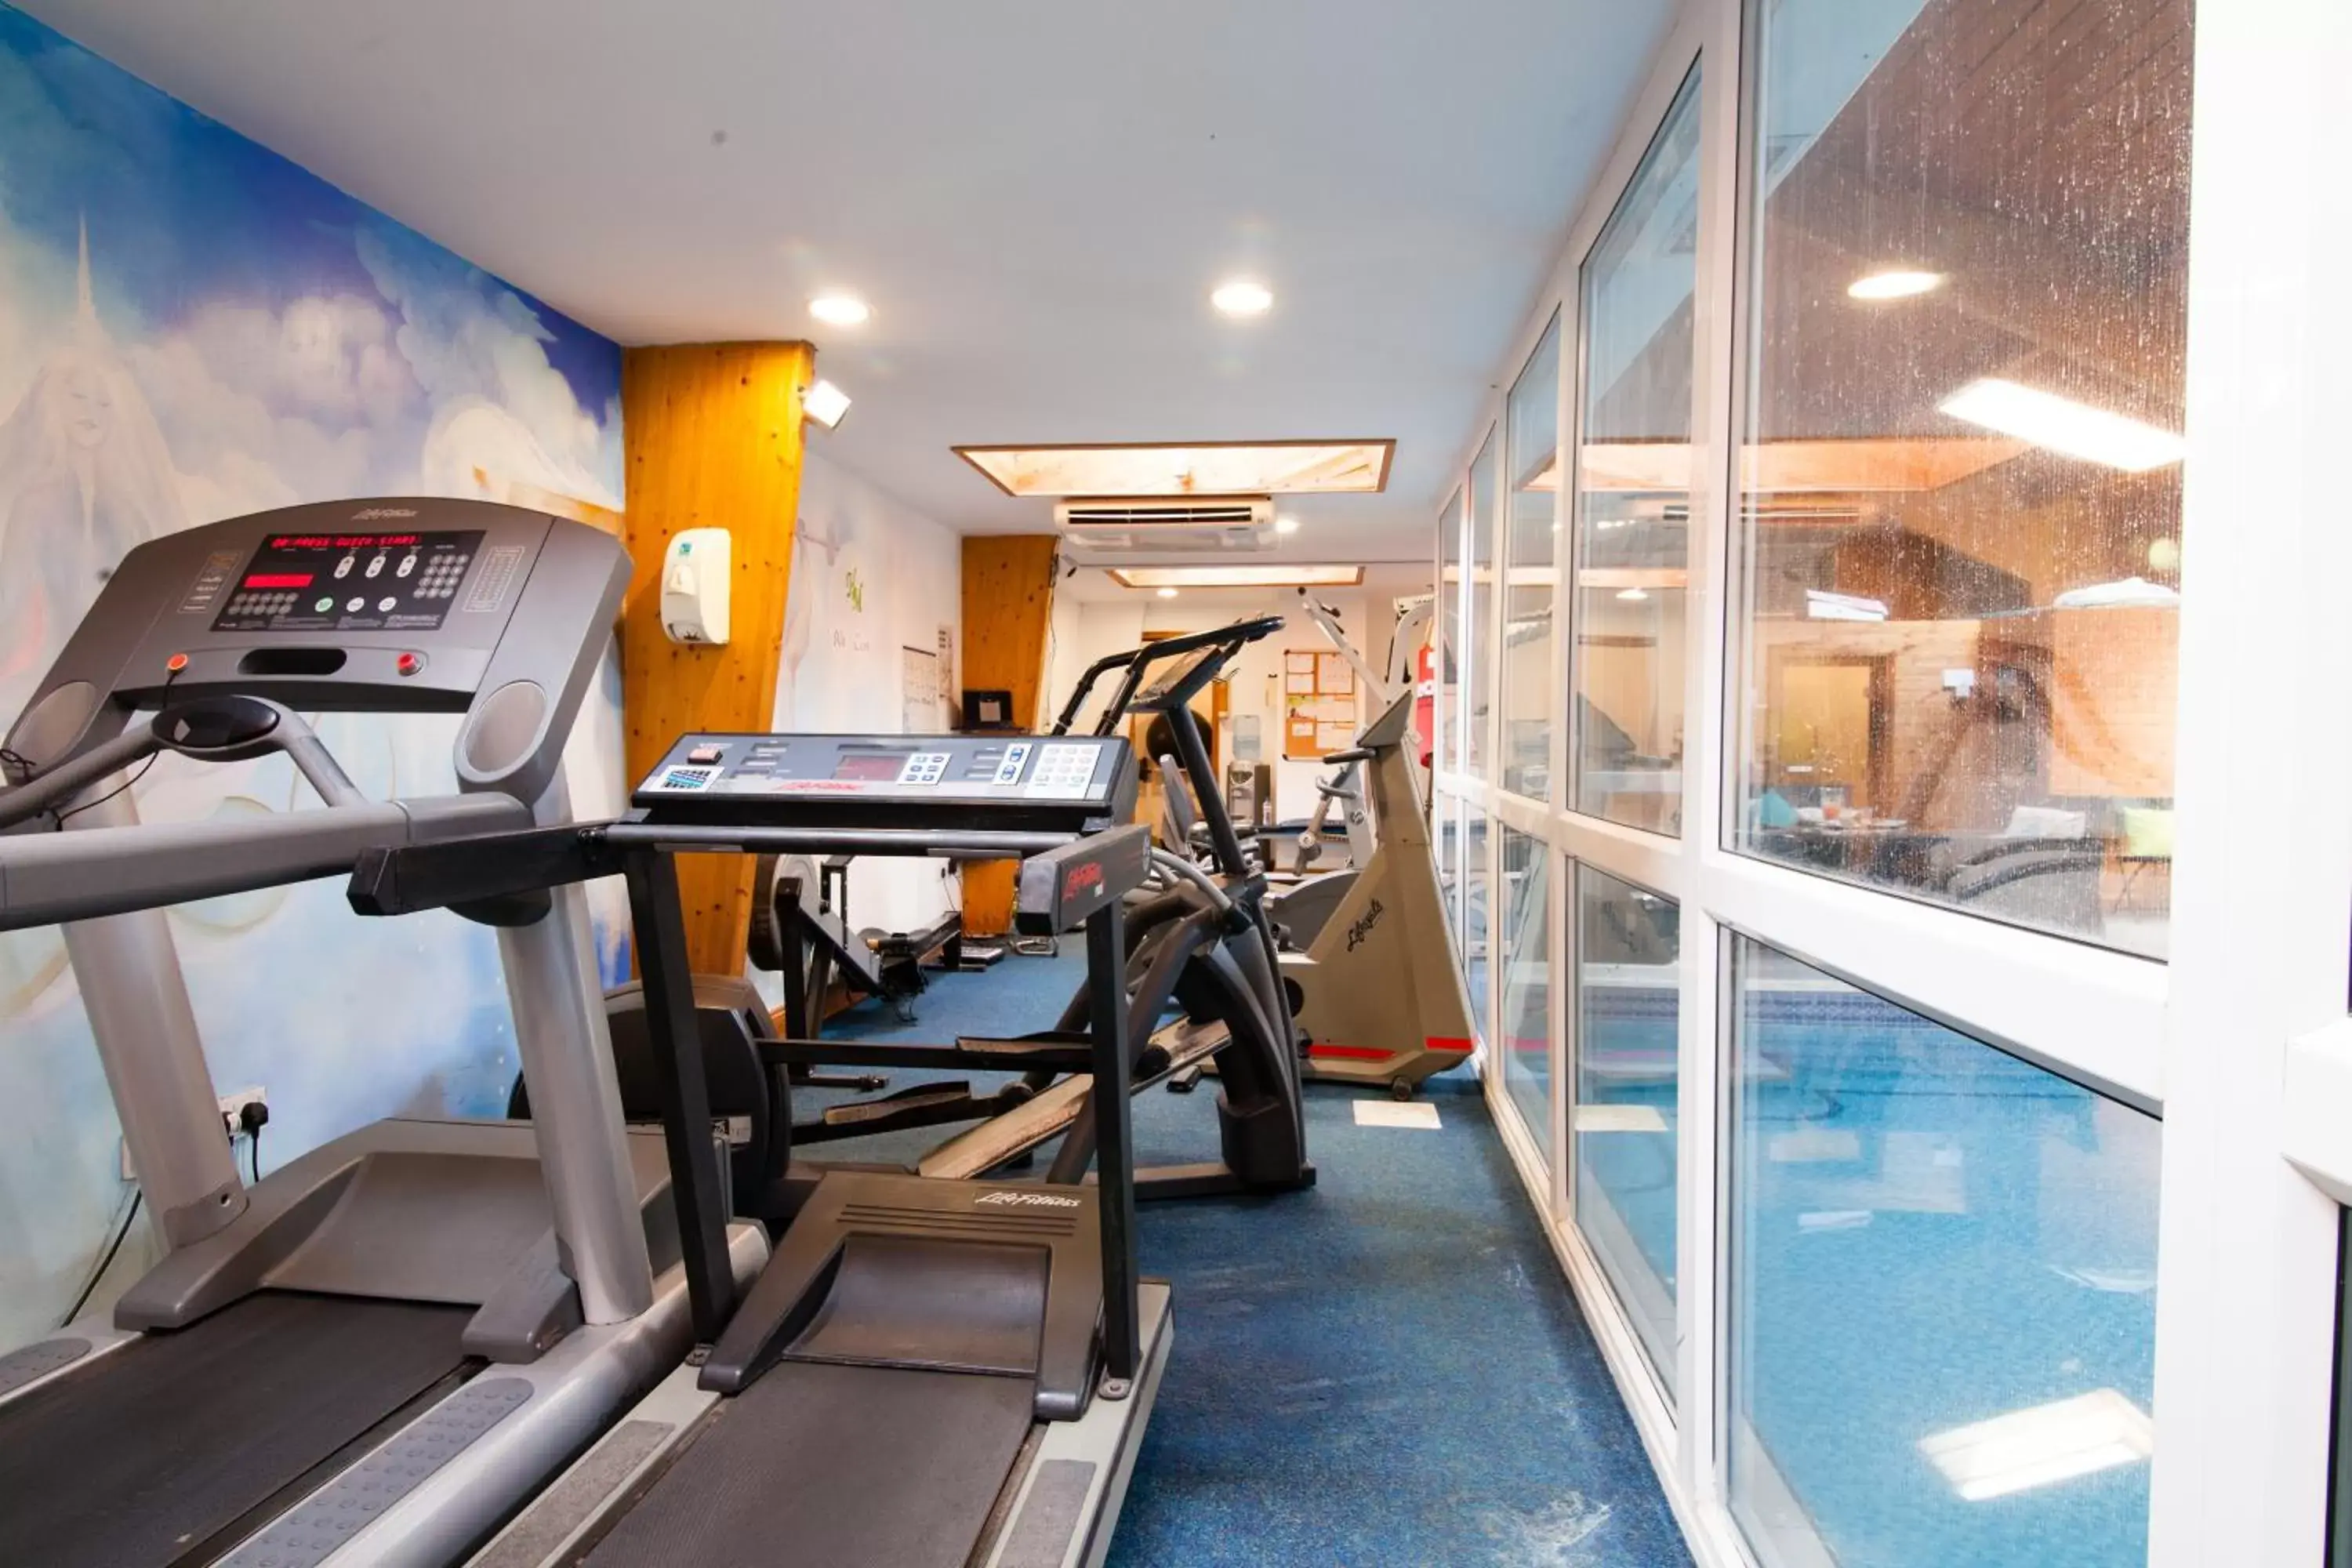 Fitness centre/facilities, Fitness Center/Facilities in Hunters Meet